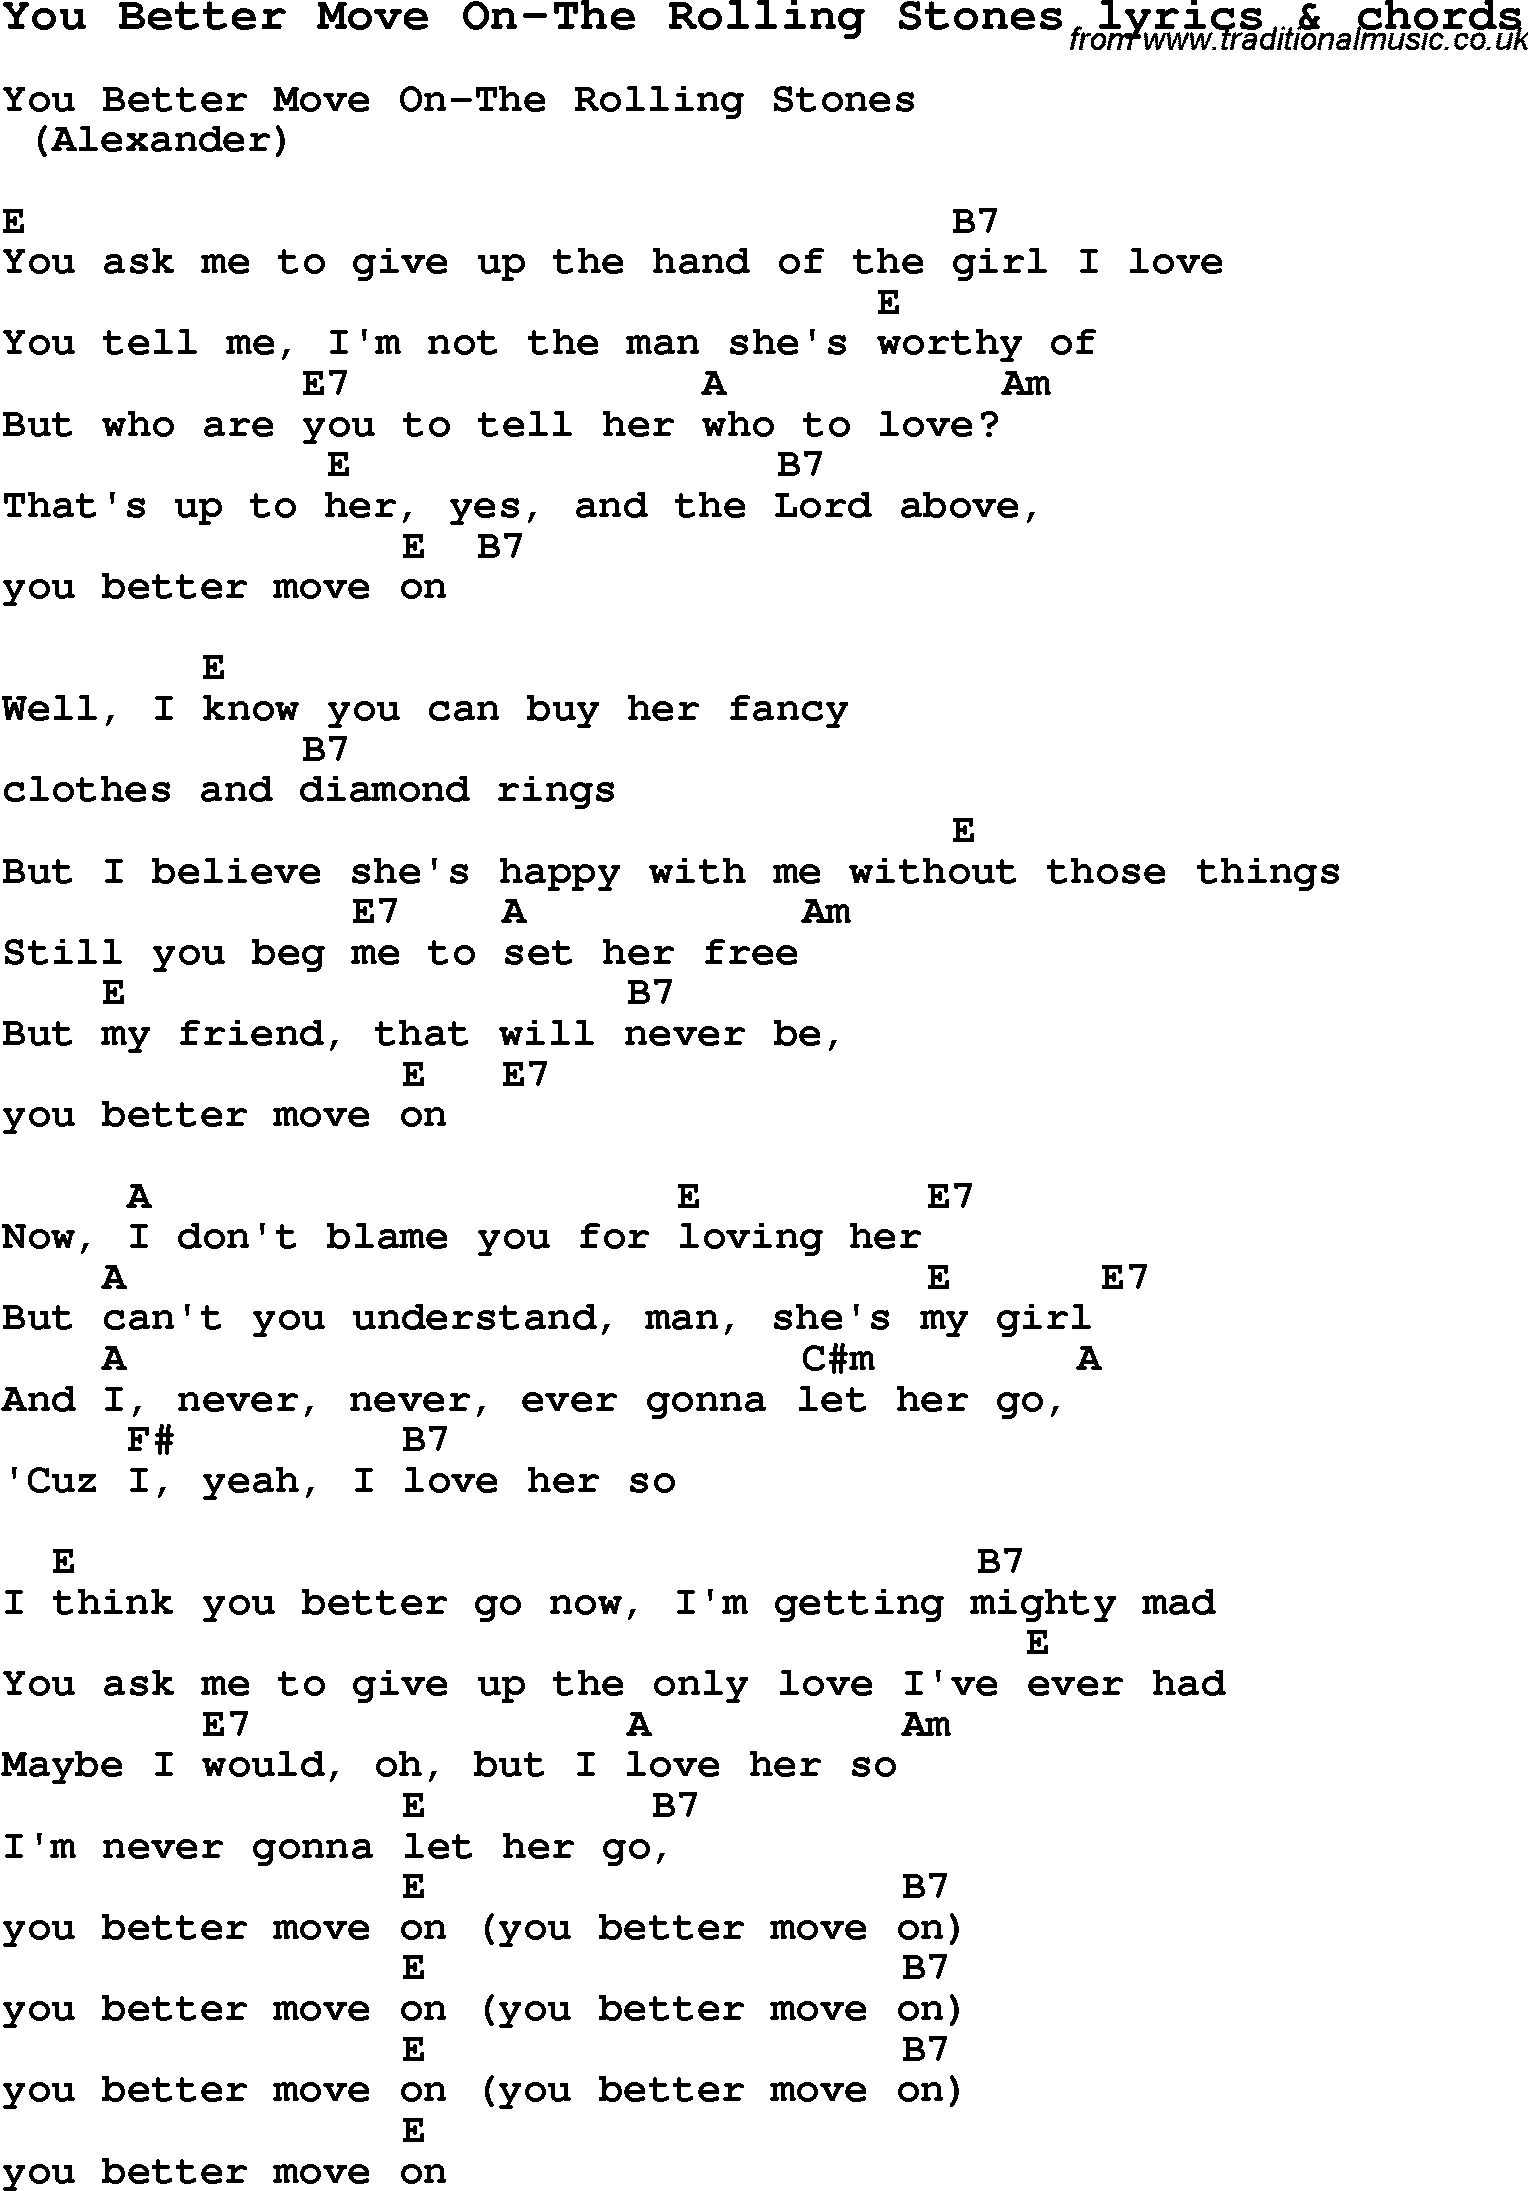 Love Song Lyrics for: You Better Move On-The Rolling Stones with chords for Ukulele, Guitar Banjo etc.